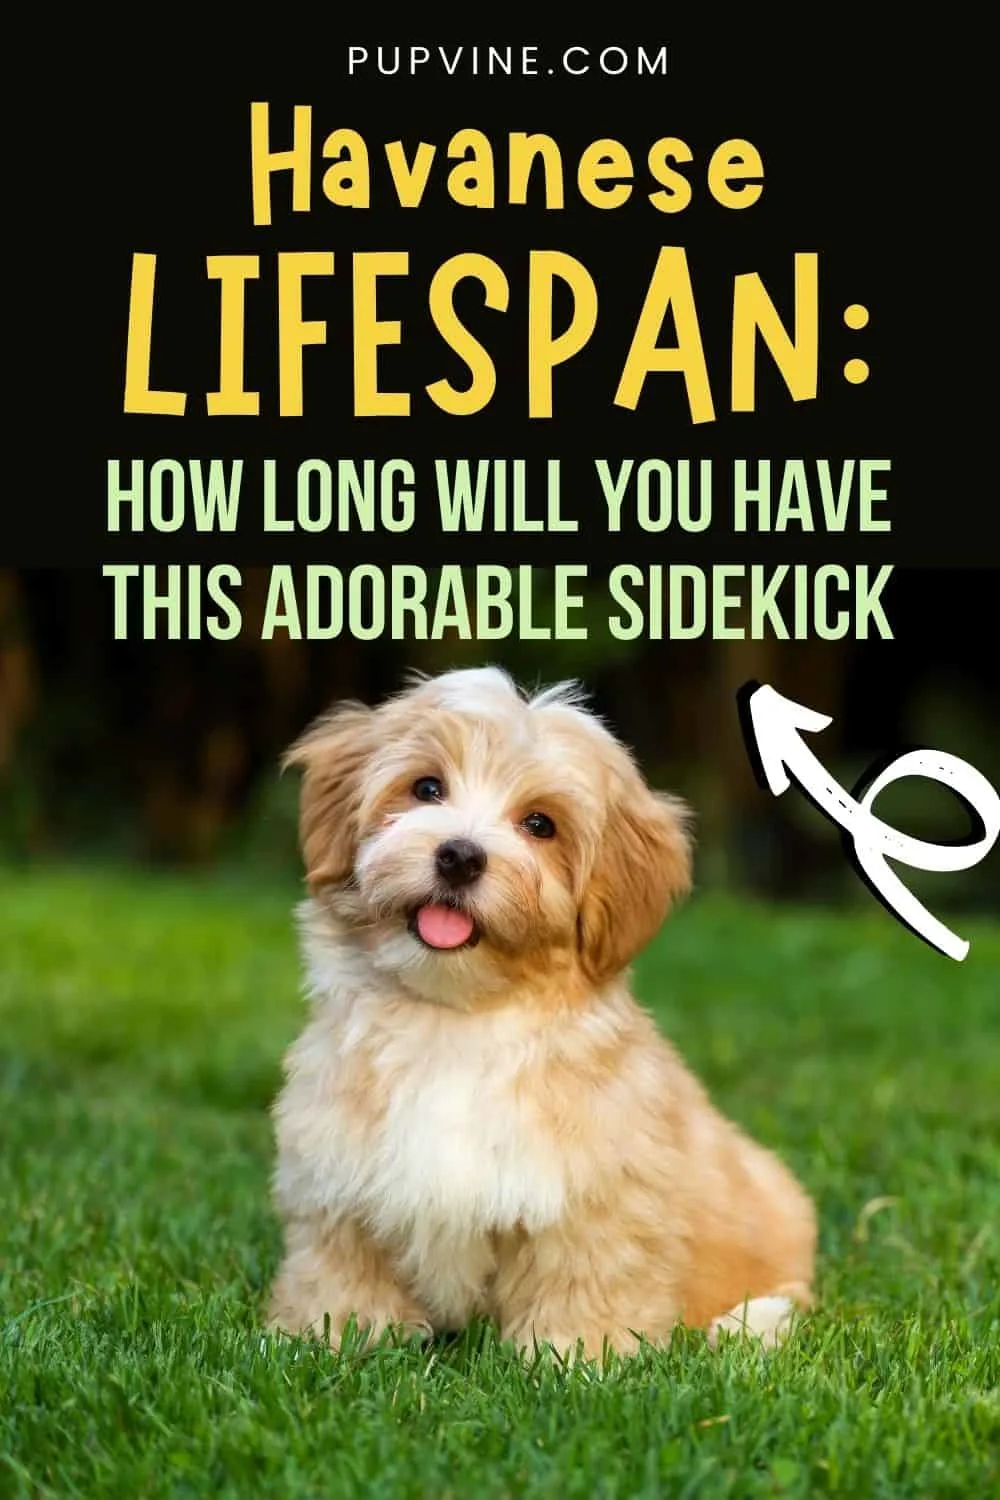 Havanese Lifespan How Long Will You Have This Adorable Sidekick